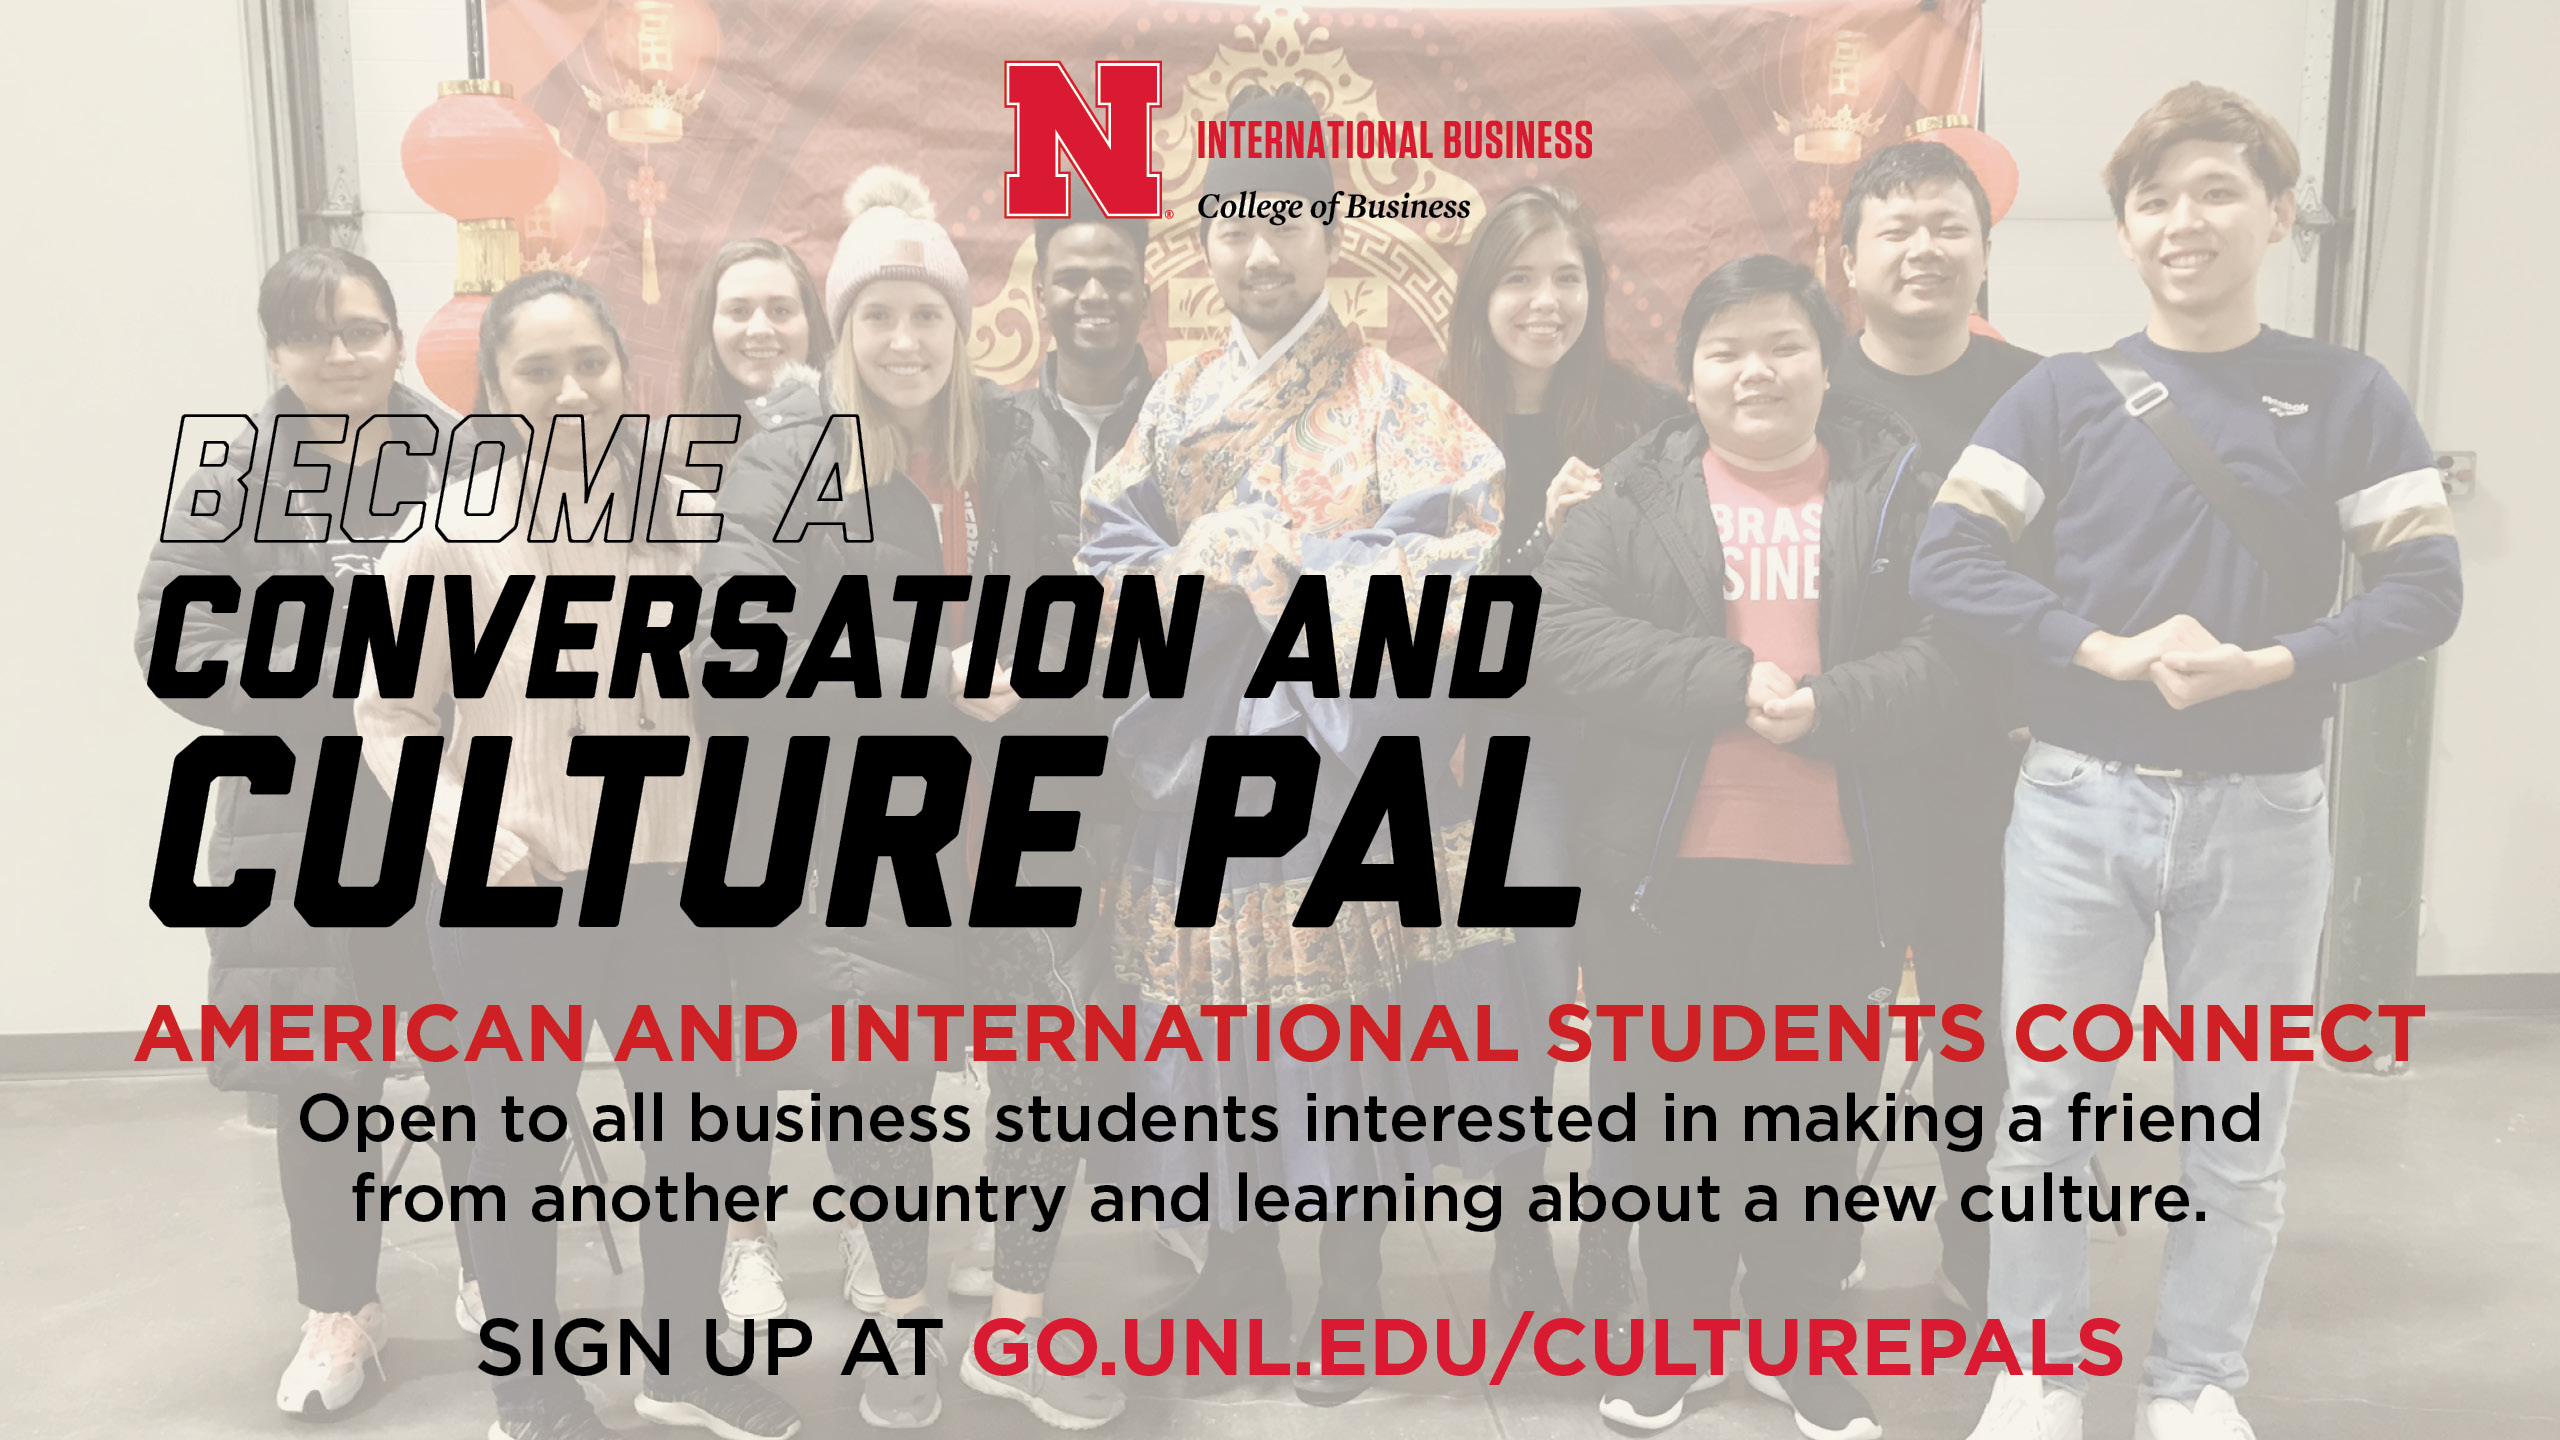 Become a Conversation and Culture Pal